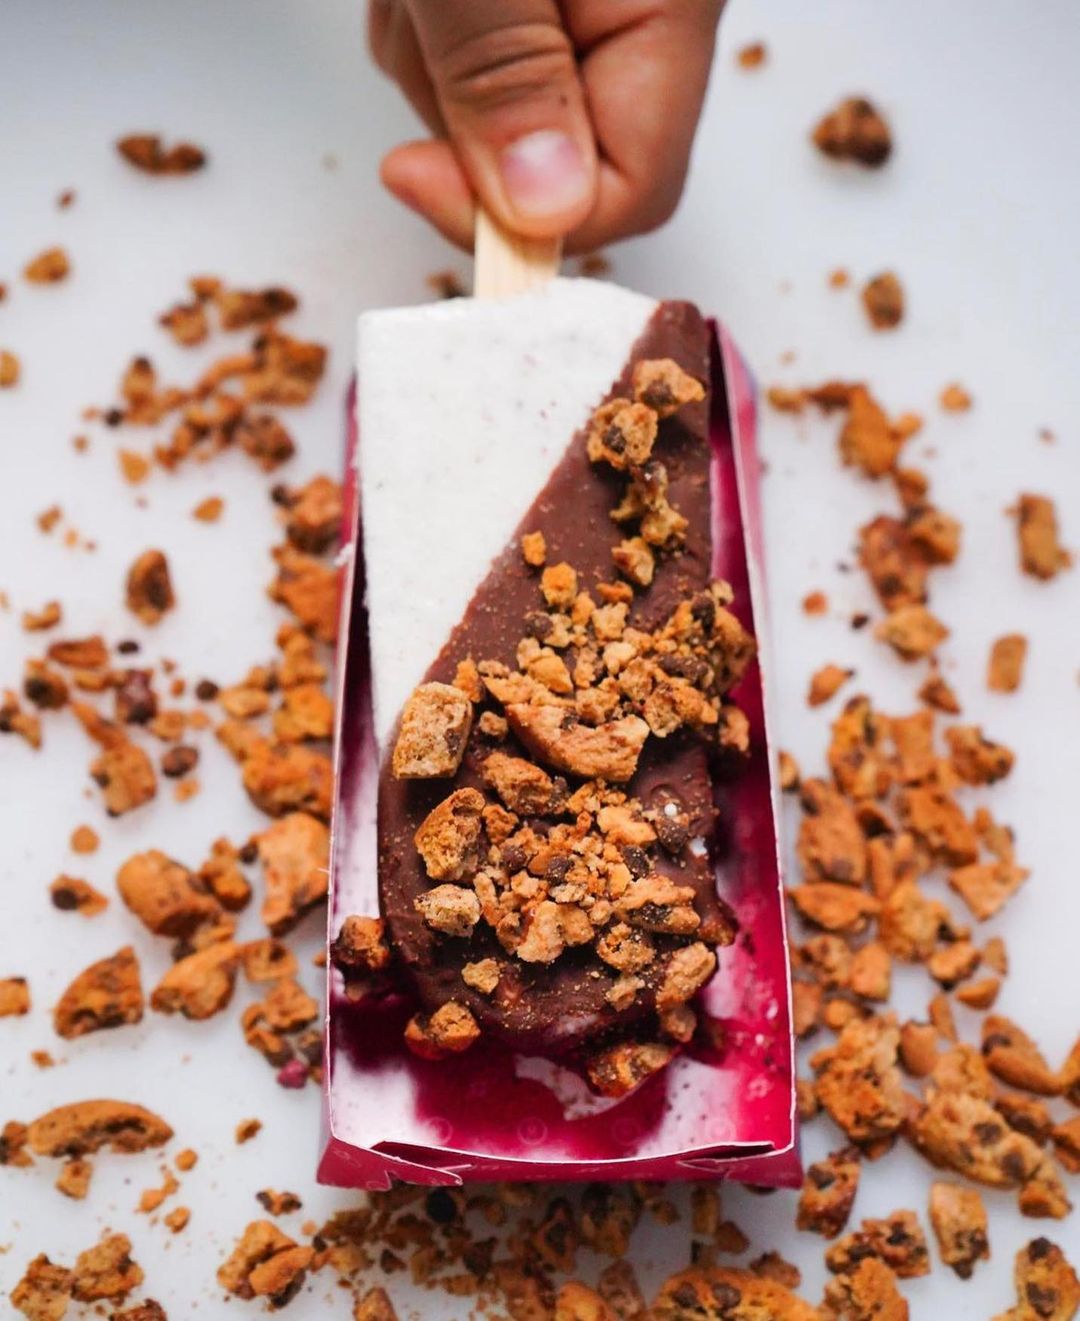 Ice cream bar with graham crumble from PalettAmerica